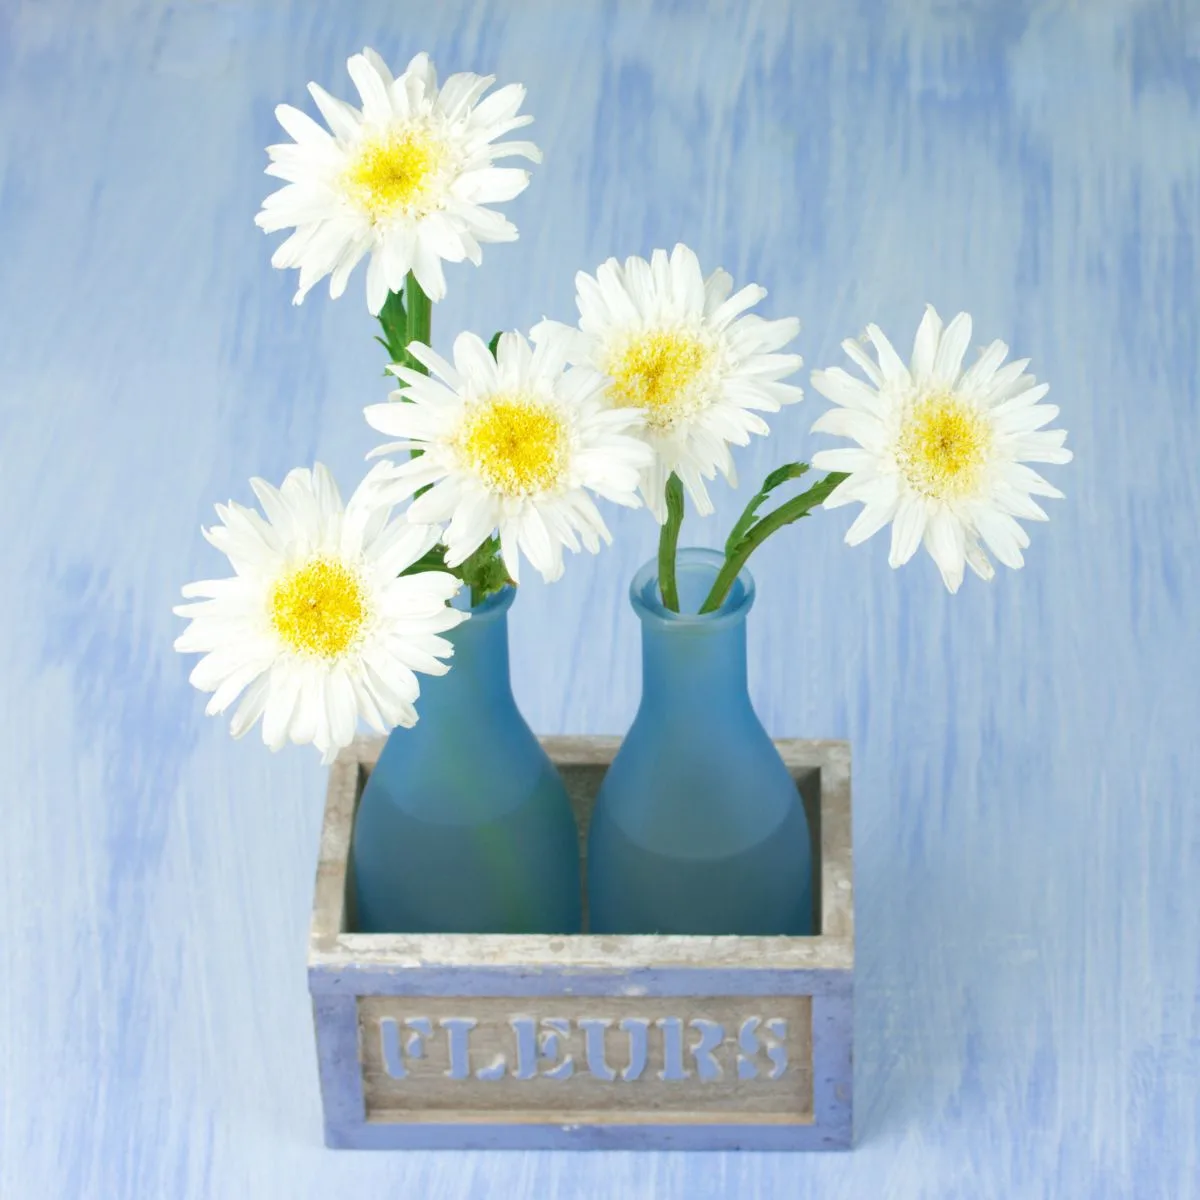 white daisies in blue vases.